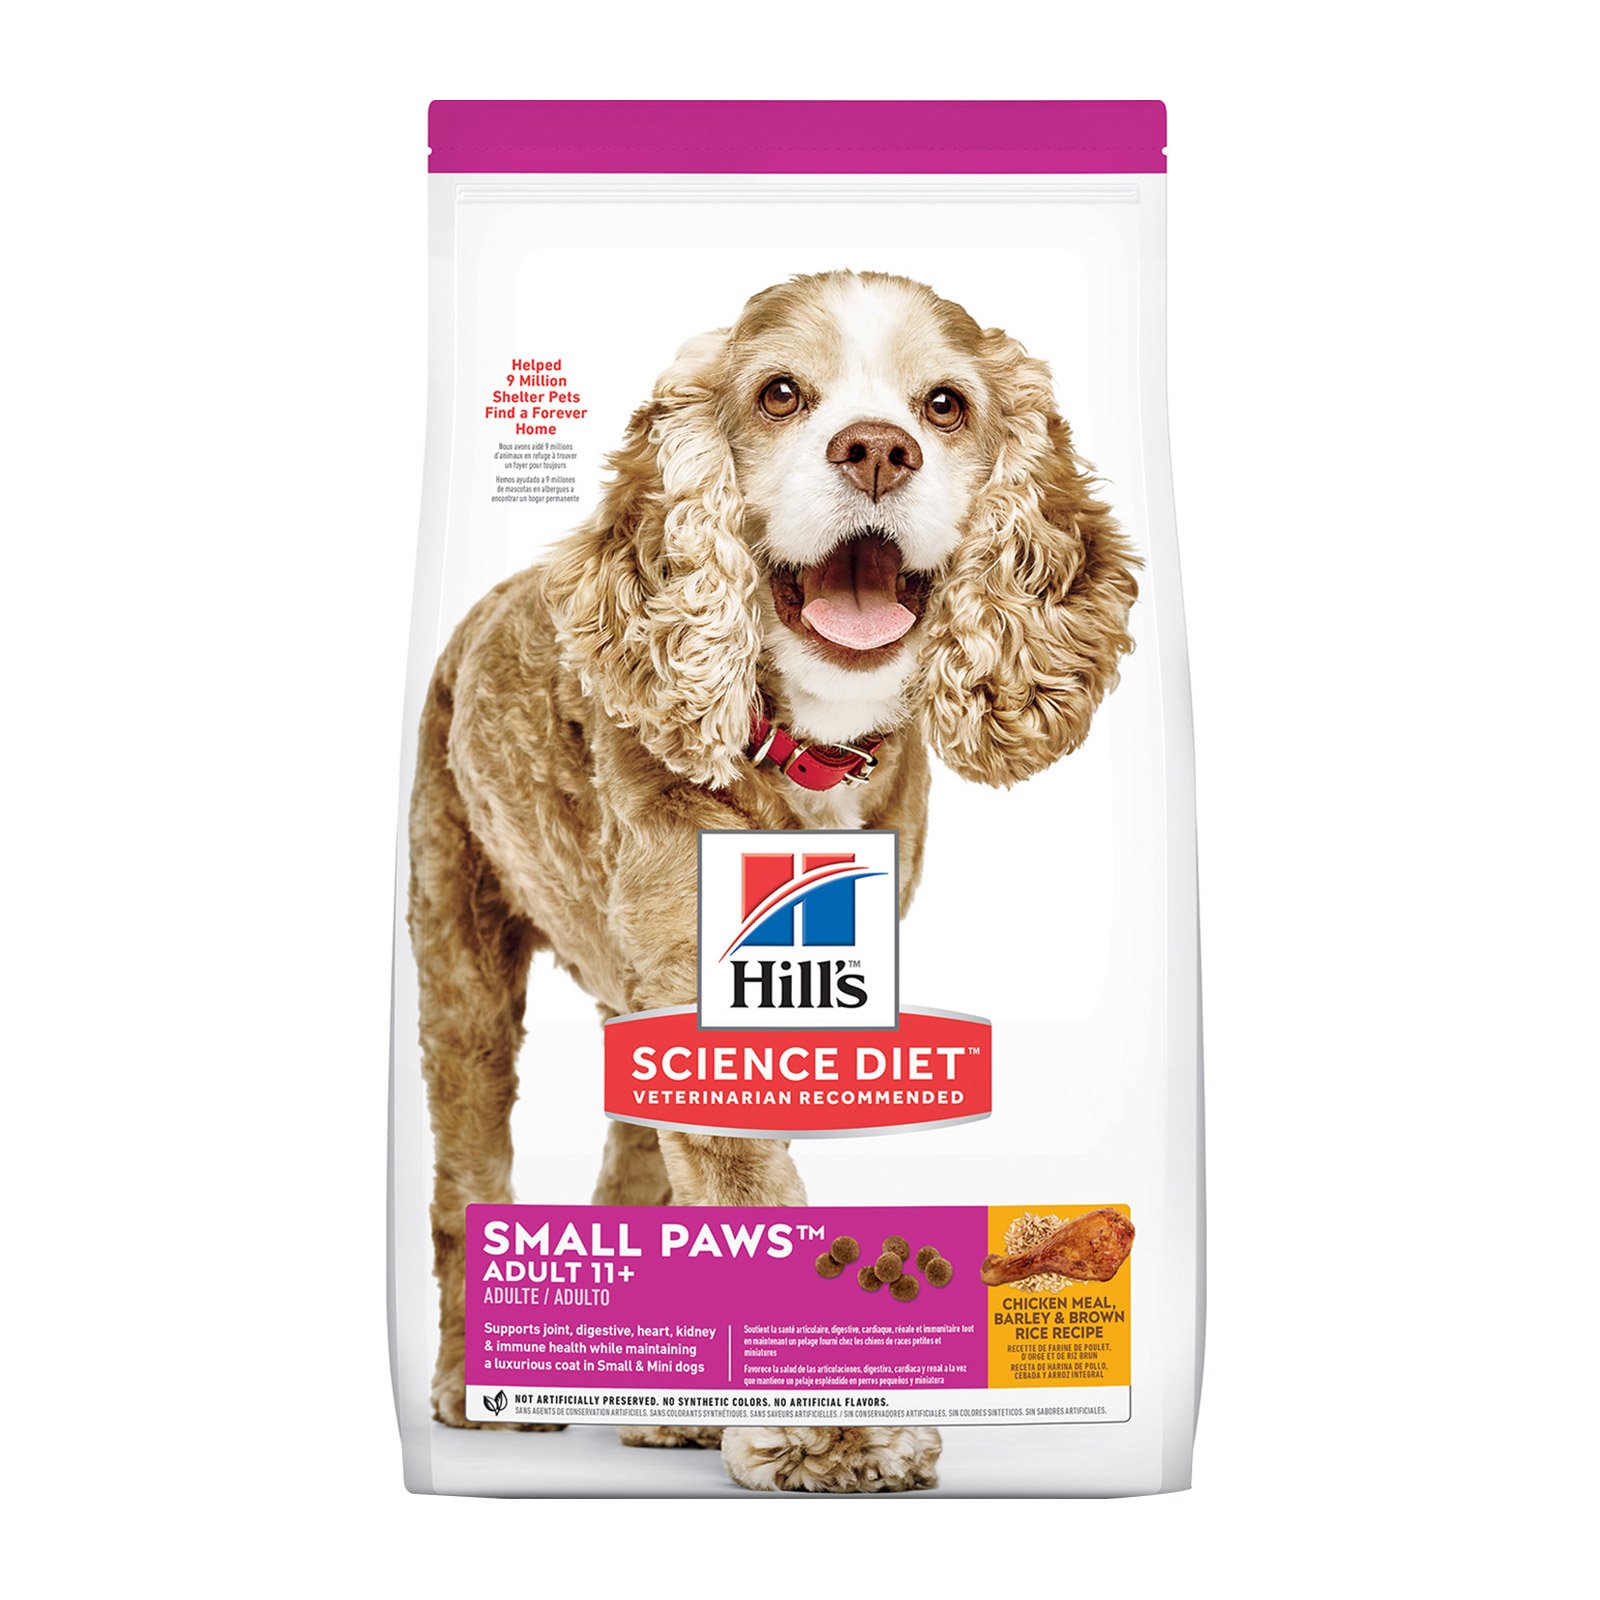 Hill's Science Diet Adult 11+ Small Paws Chicken, Barley & Rice Dry Dog Food   2.04 Kgs